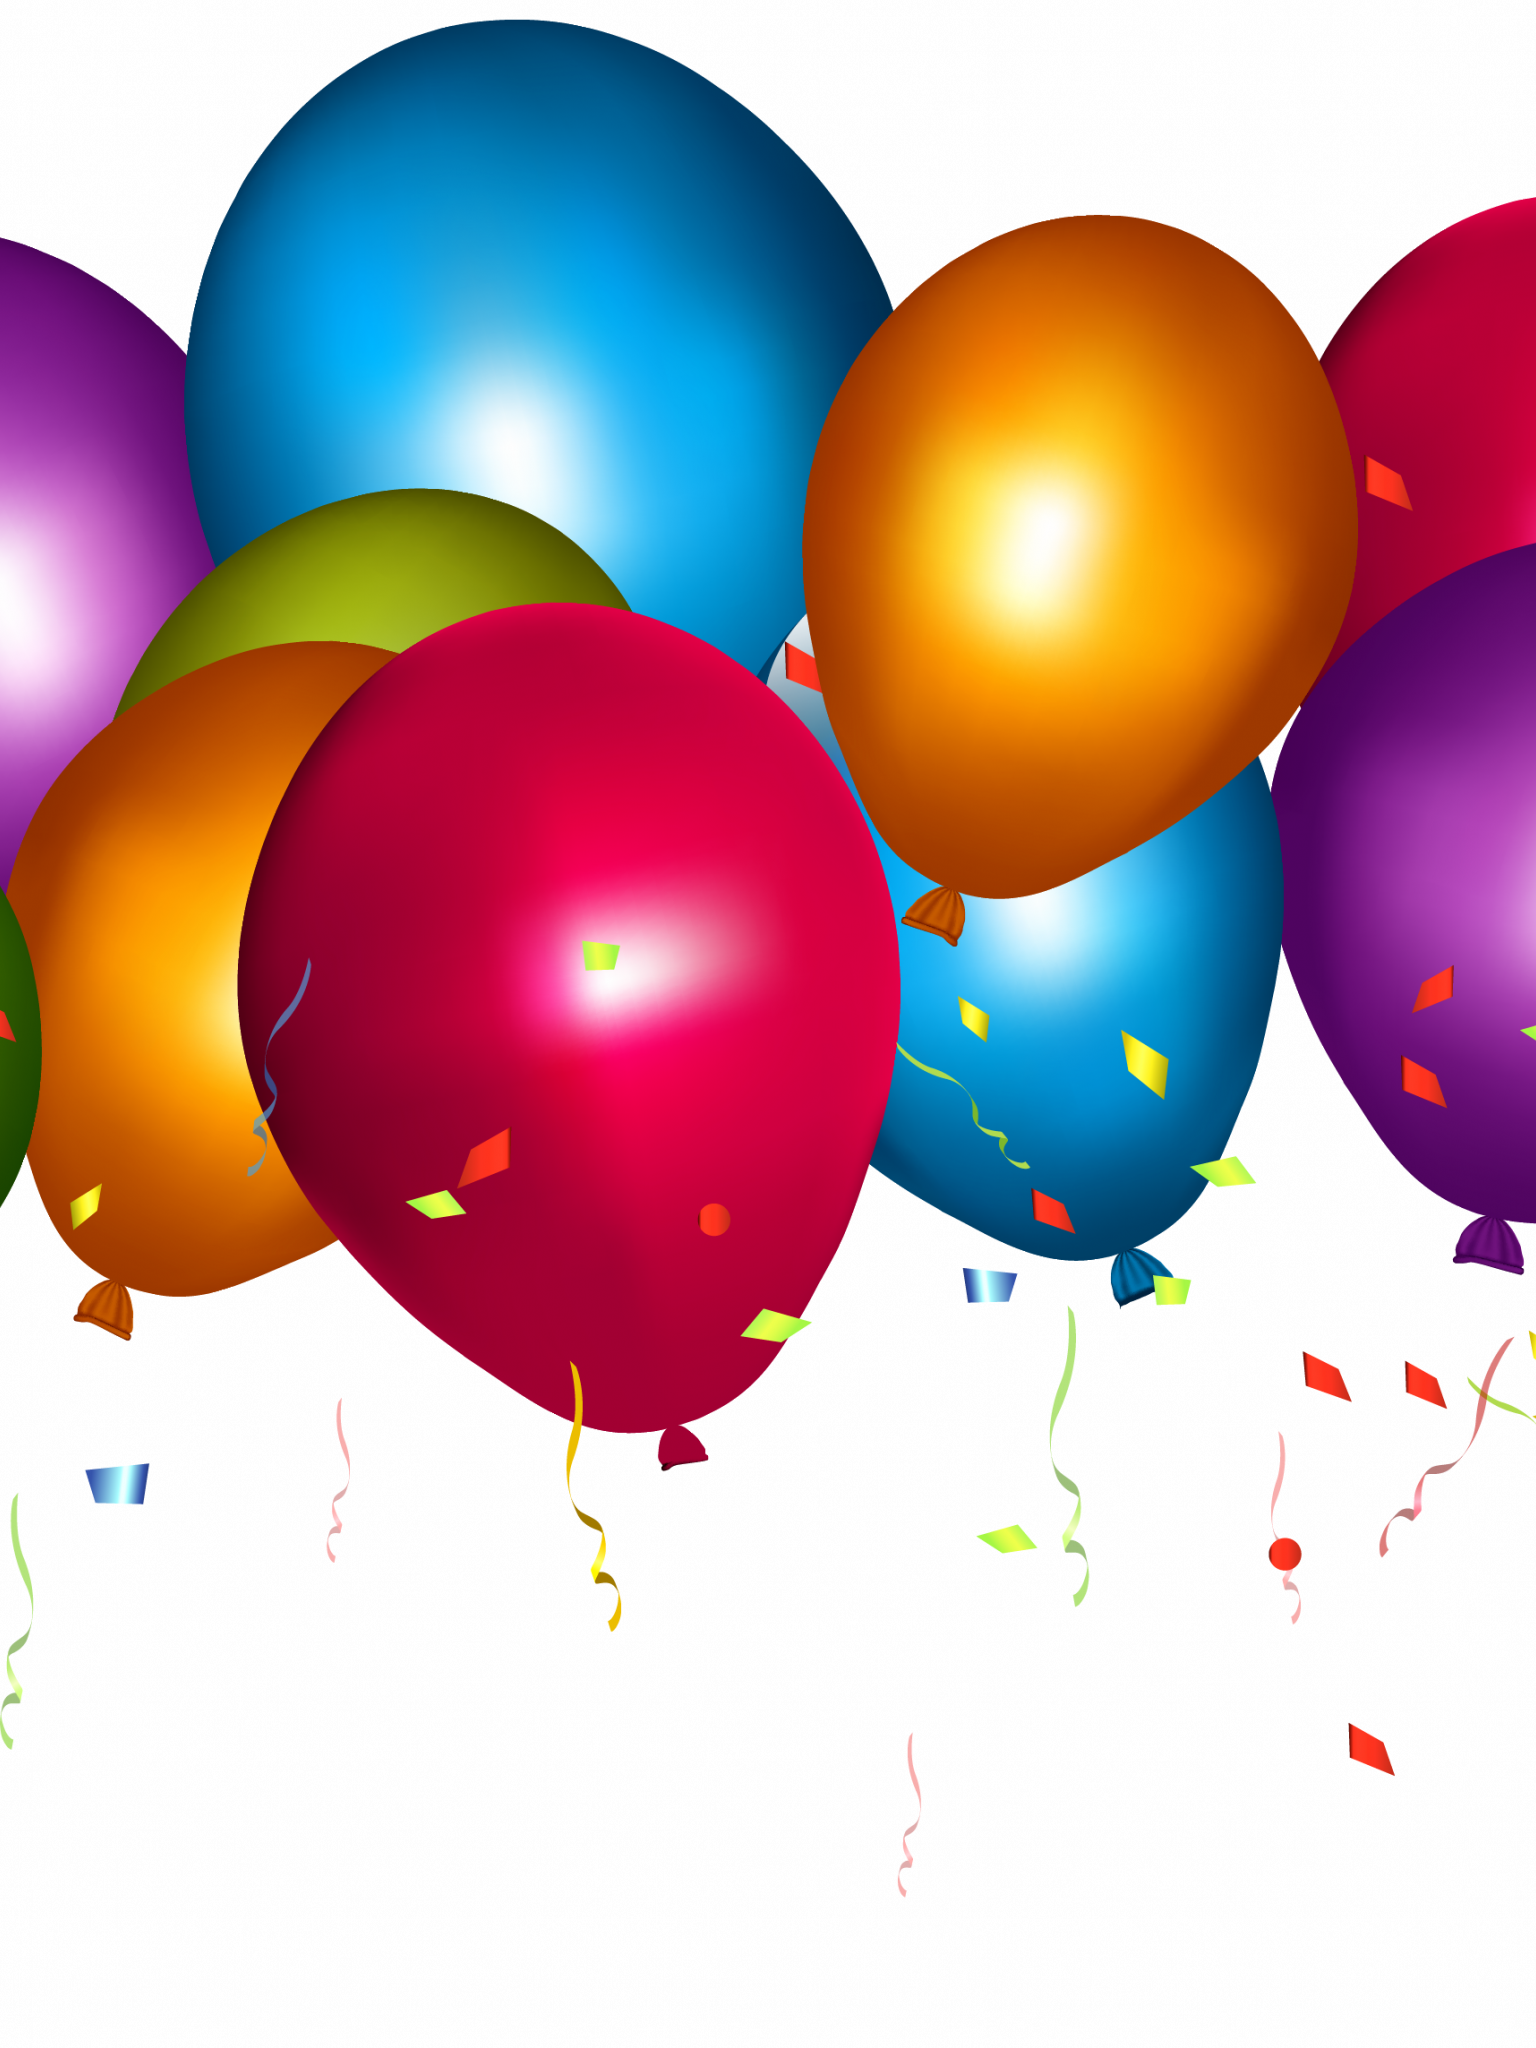 Balloons Confetti PNG Image Transparent Background